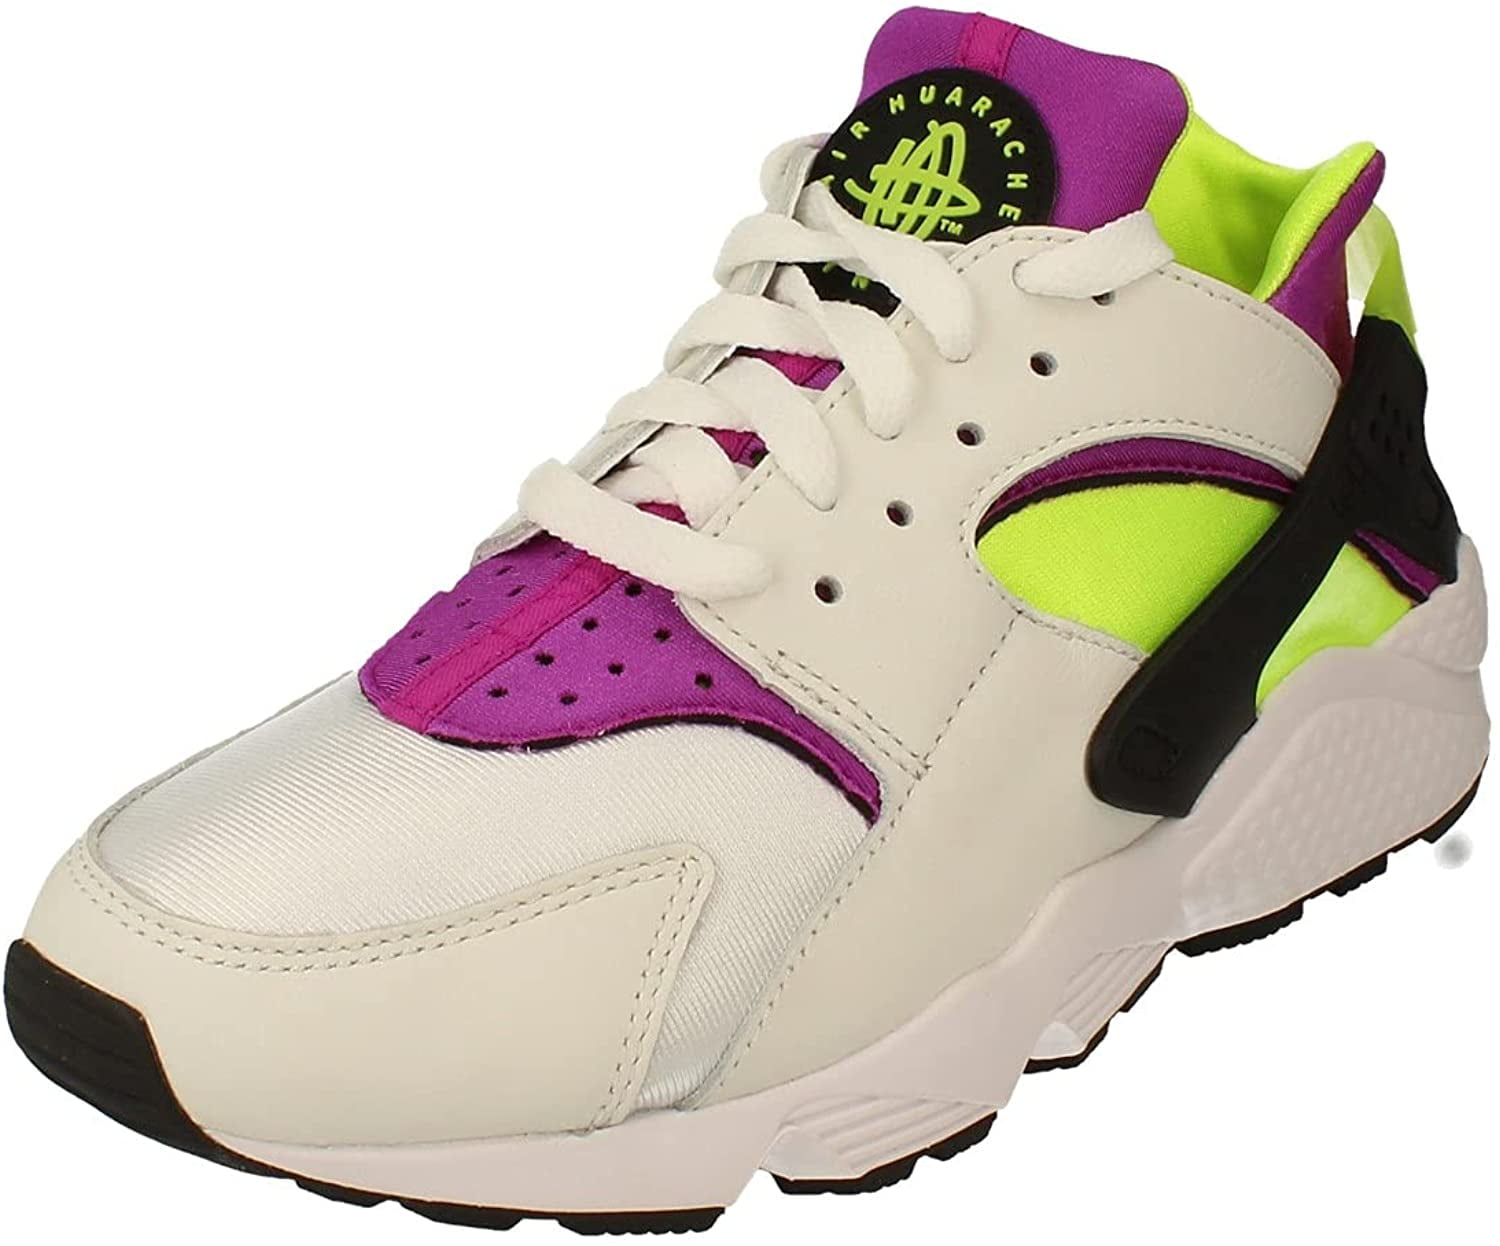 Air Running Trainers Dd1068 Sneakers Shoes 10 White Neon Yellow Magenta 104 - Walmart.com